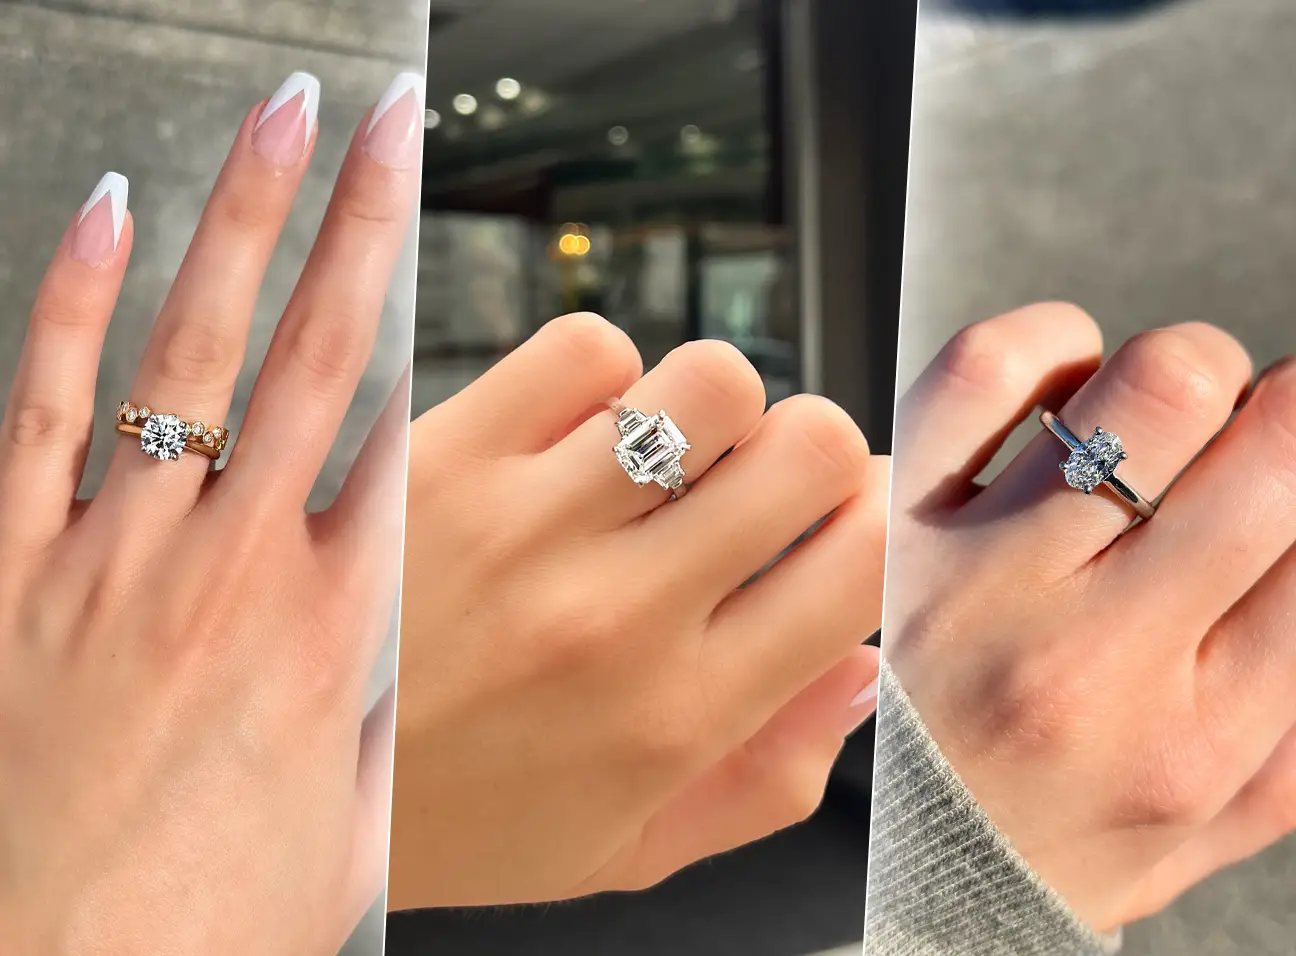 3 Hands Wearing Engagement Rings